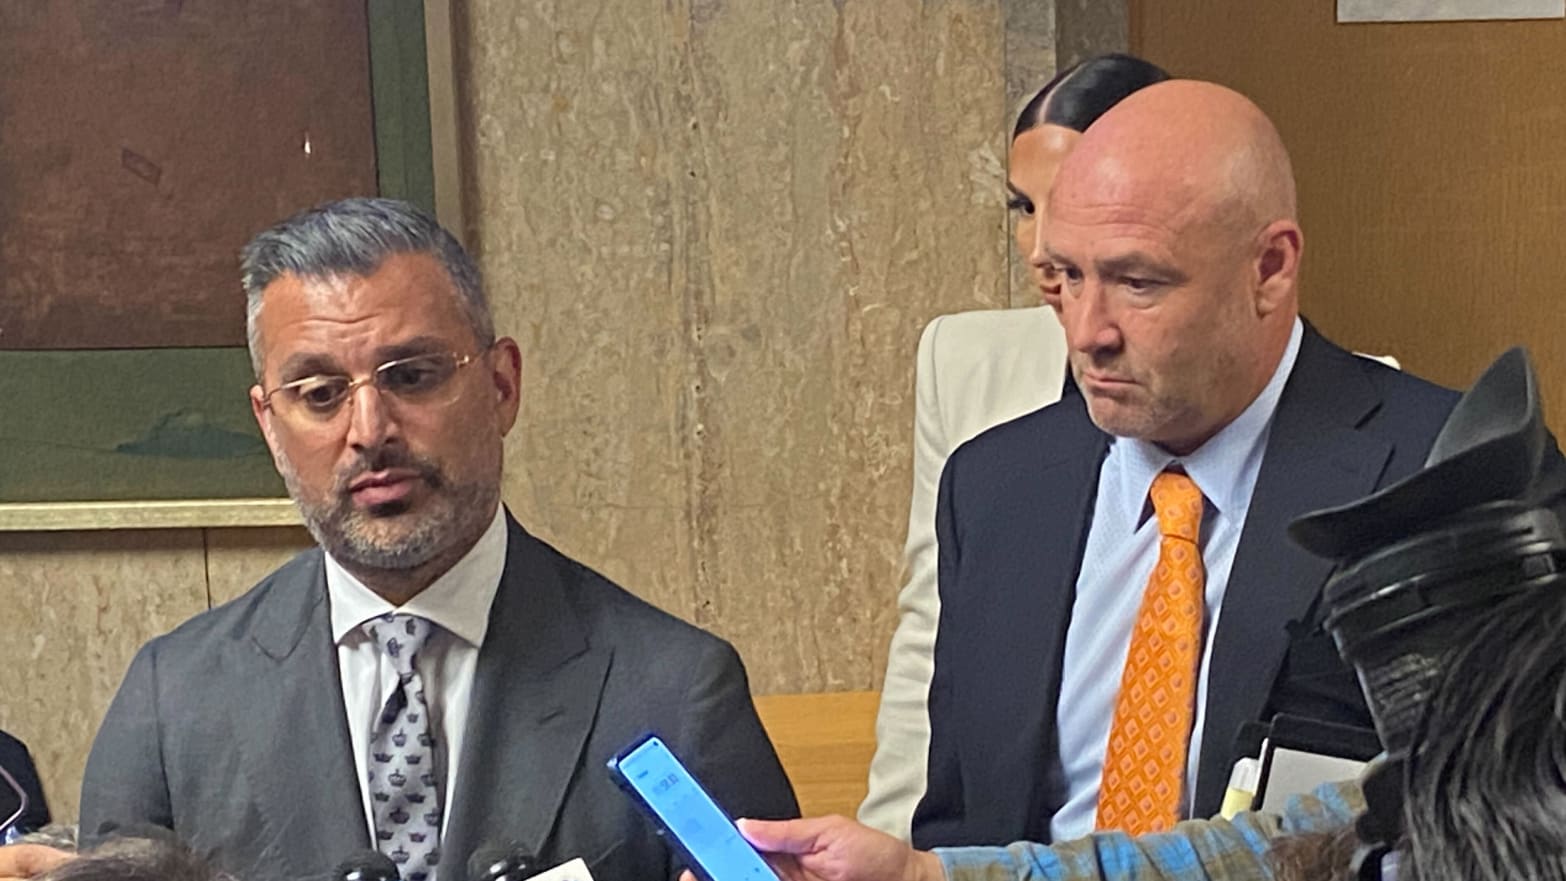 Attorney Saam Zangeneh (left) and Bradford Cohen (right) speak about their client Nima Momeni, who has been charged with homicide in the brutal stabbing death of Cashapp Founder Bob Lee.